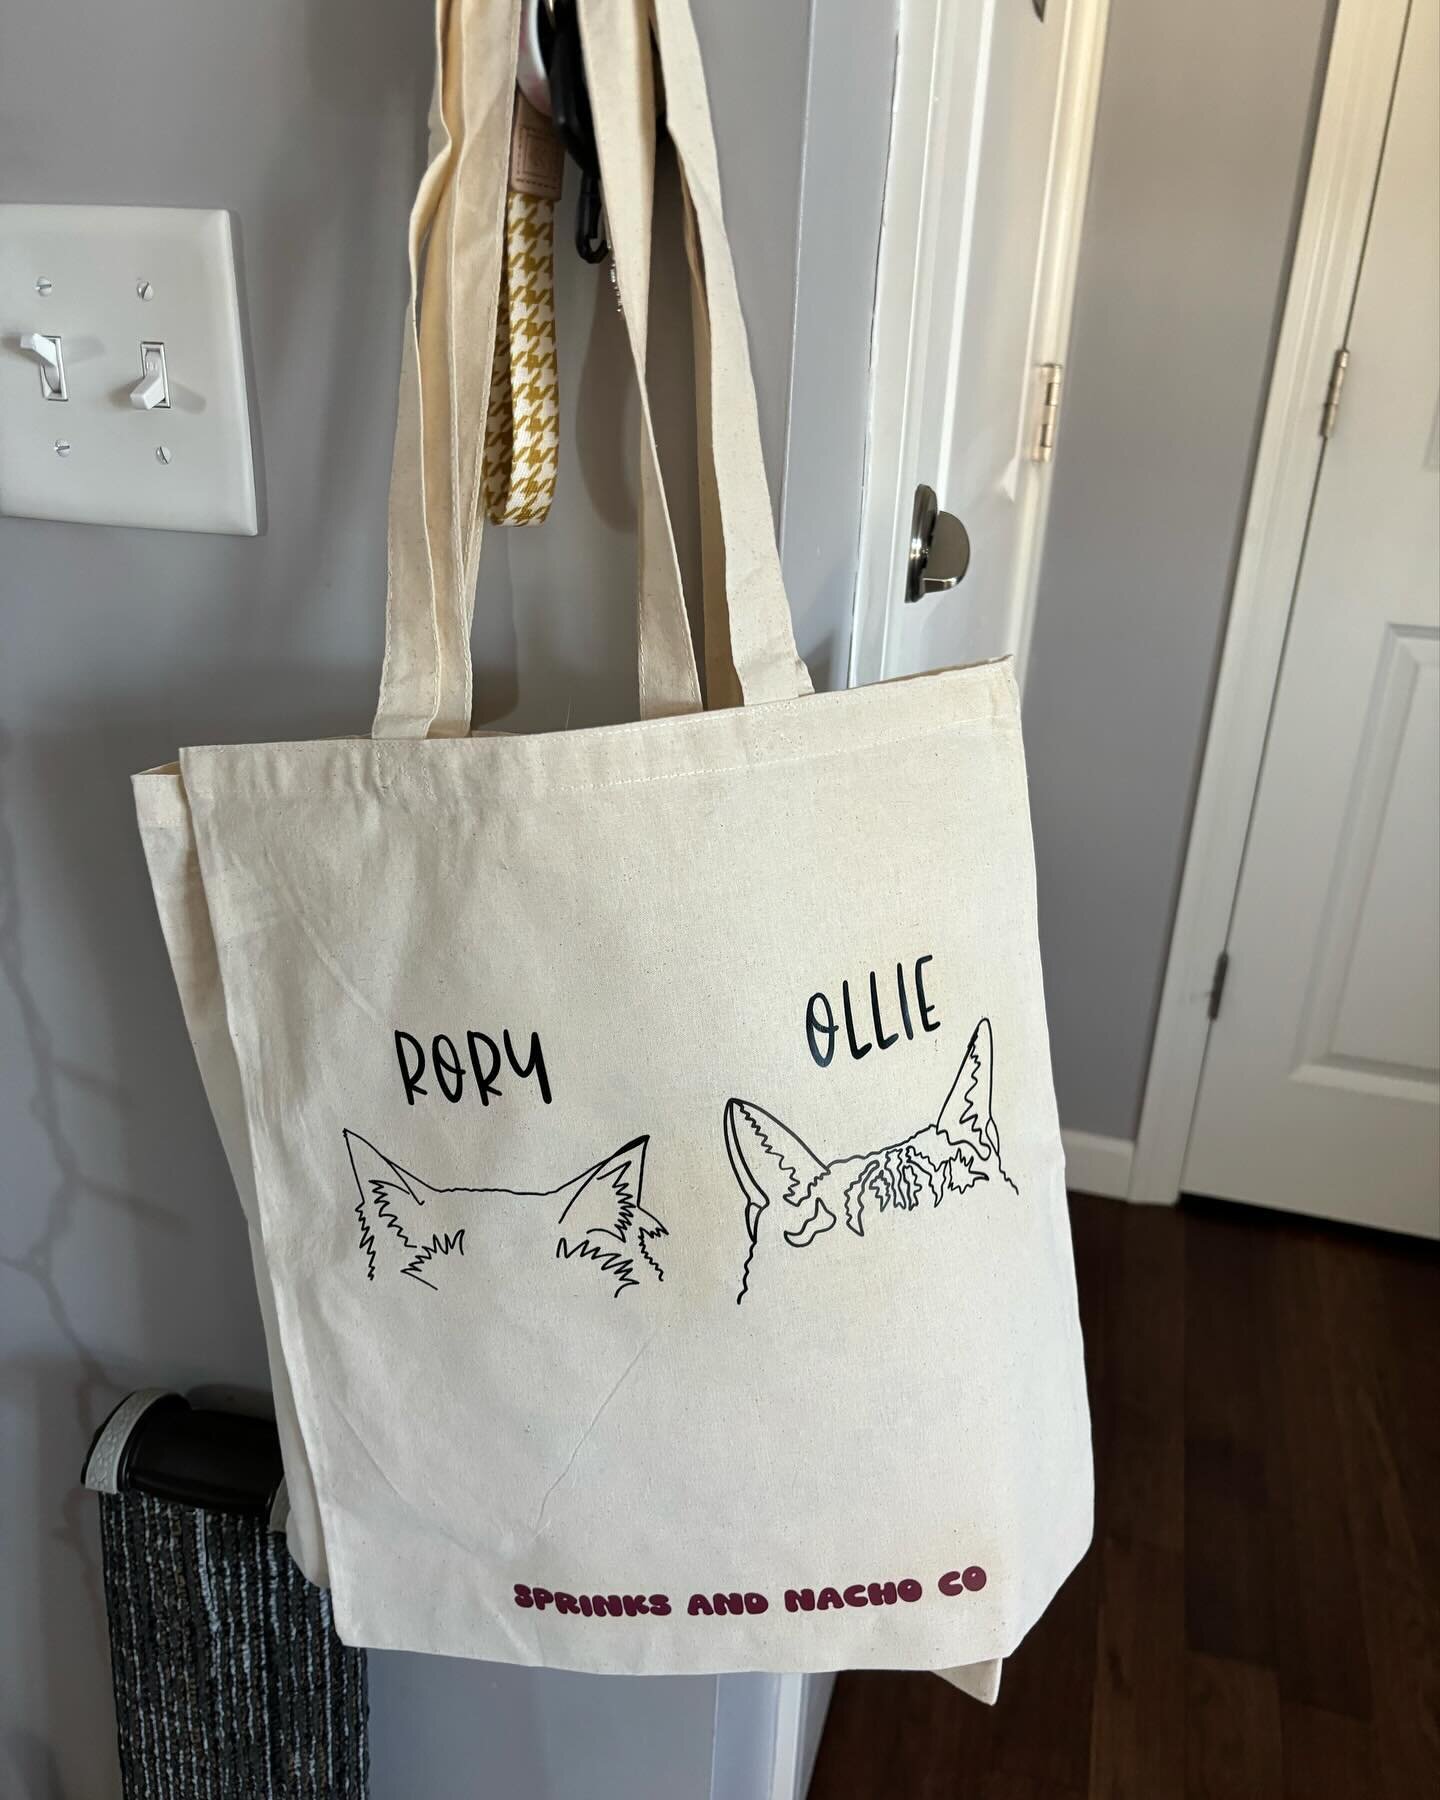 * NEW LISTING ALERT* custom pet tote bags for your kitty, pup, or more! Perfect for travel, daily use, or to tote your pets things from place to place! Live on Etsy now! https://sprinksandnachoco.etsy.com Link in bio and 24% off for the next week!